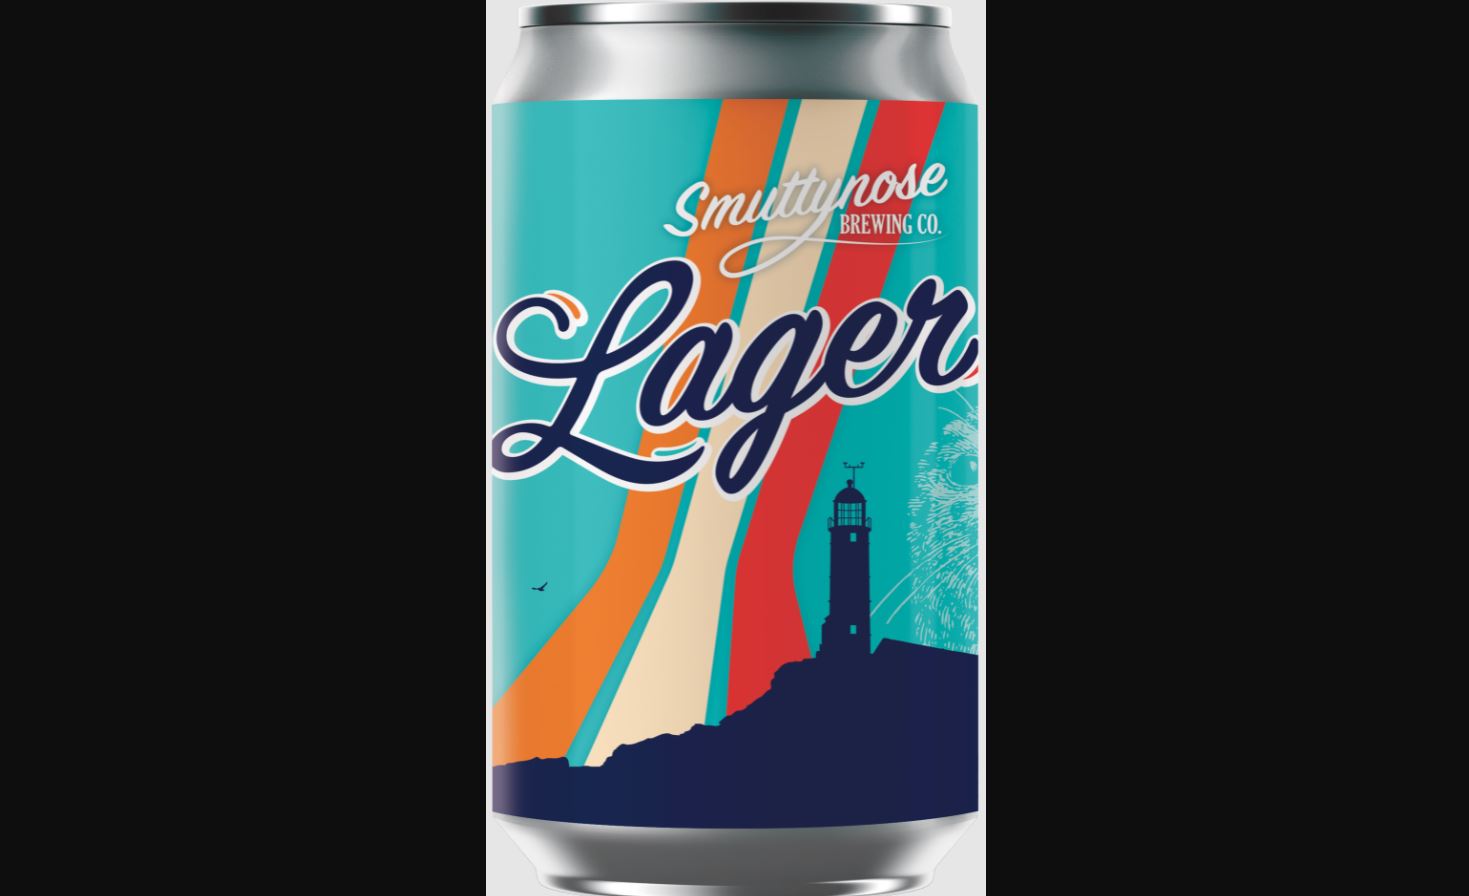 Smuttynose Lager